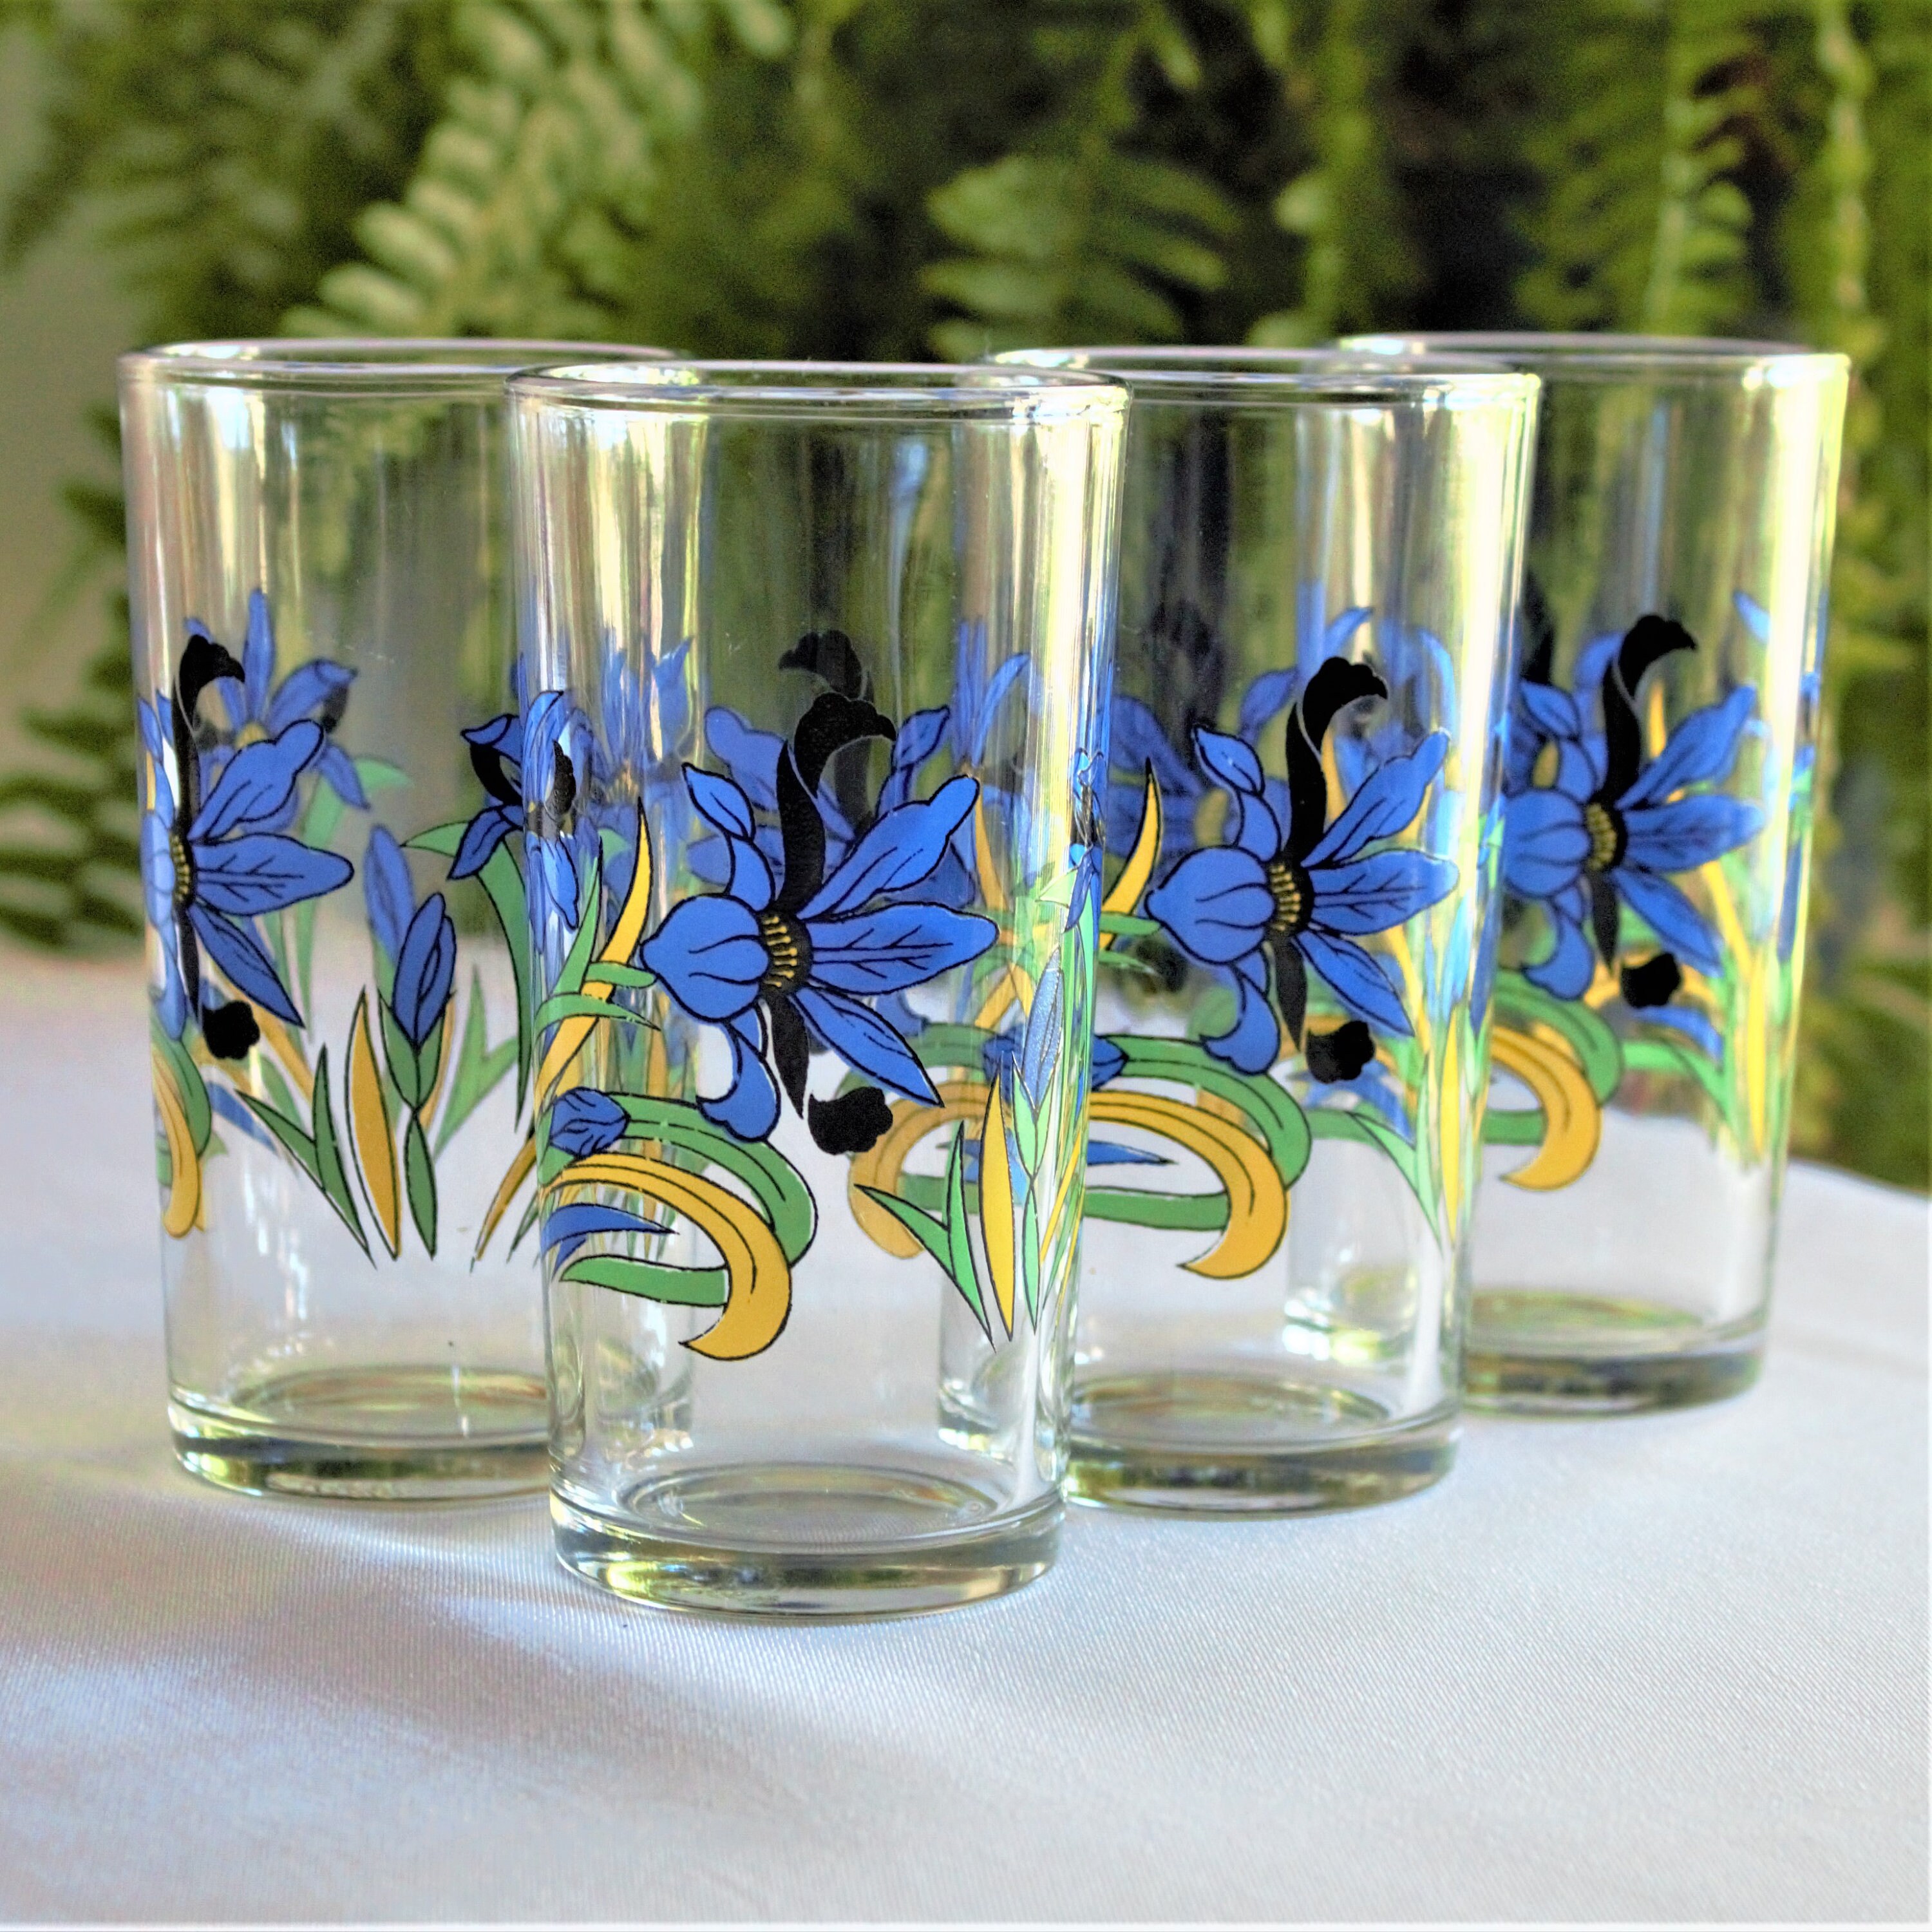 WMF Tumbler Glasses Set of 4 Tumblers with South Africa